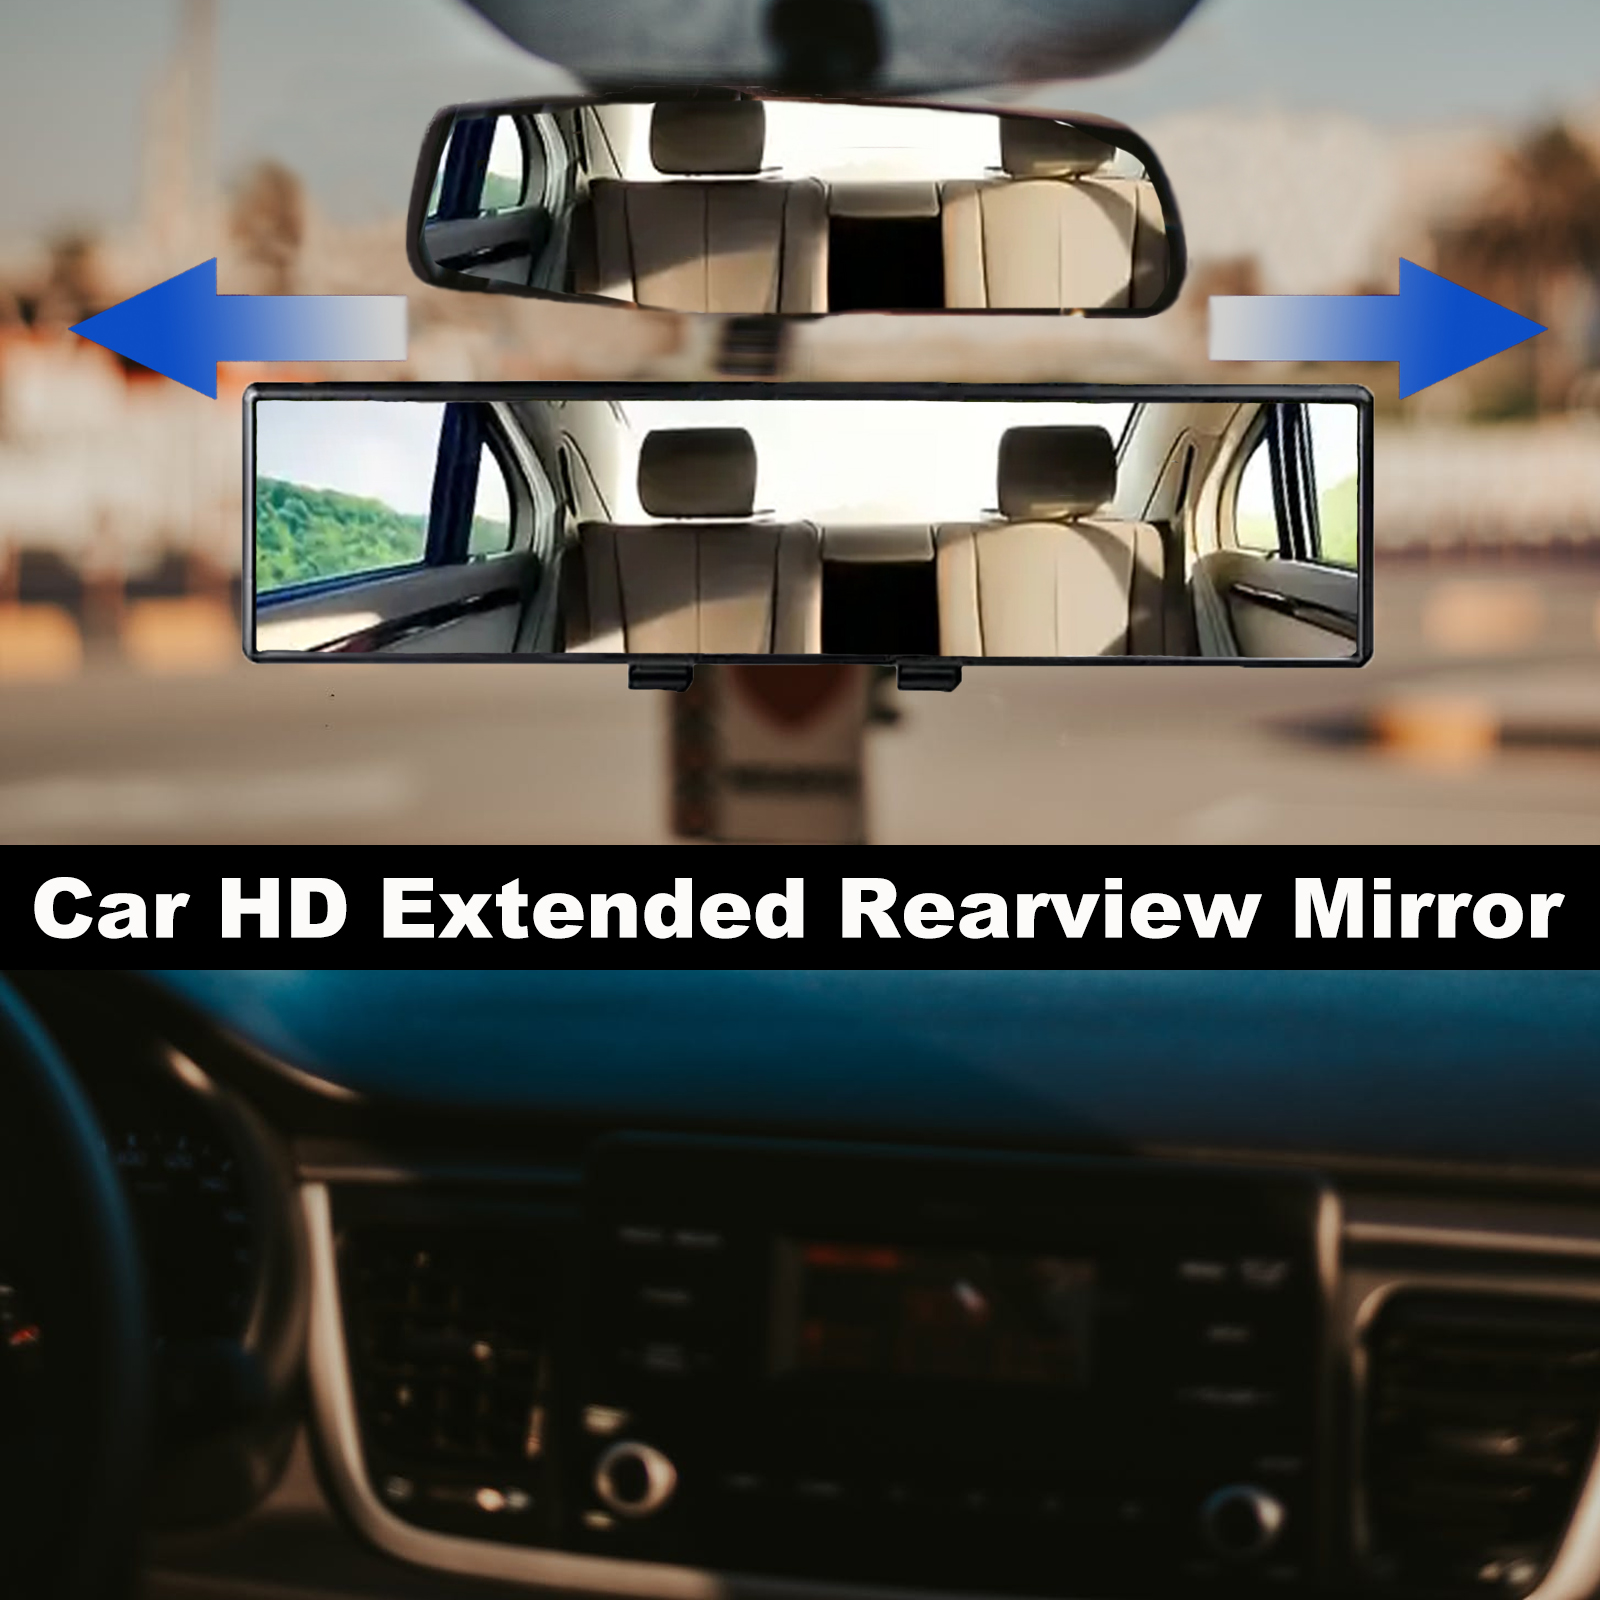 Universal Car Interior Rear View Mirror, Car Rear Mirror 360° Rotation  Adjustable Suction Cup Wide-Angle Rearview Mirror